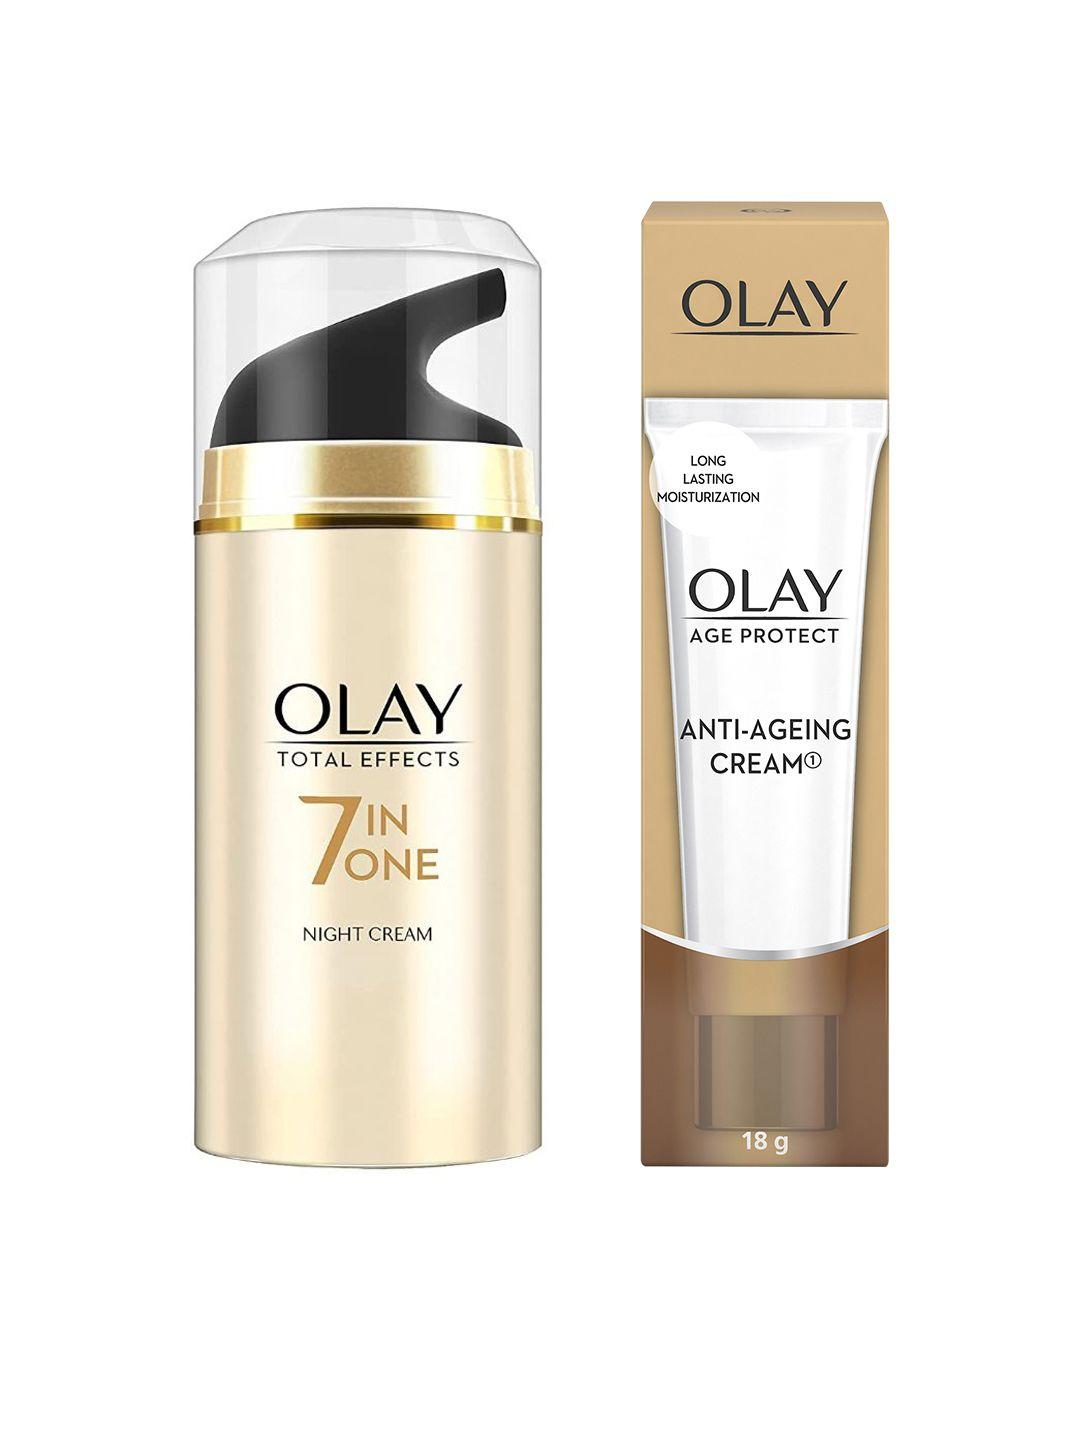 olay age protect anti-ageing cream 18g & total effects 7 in one night cream 20g